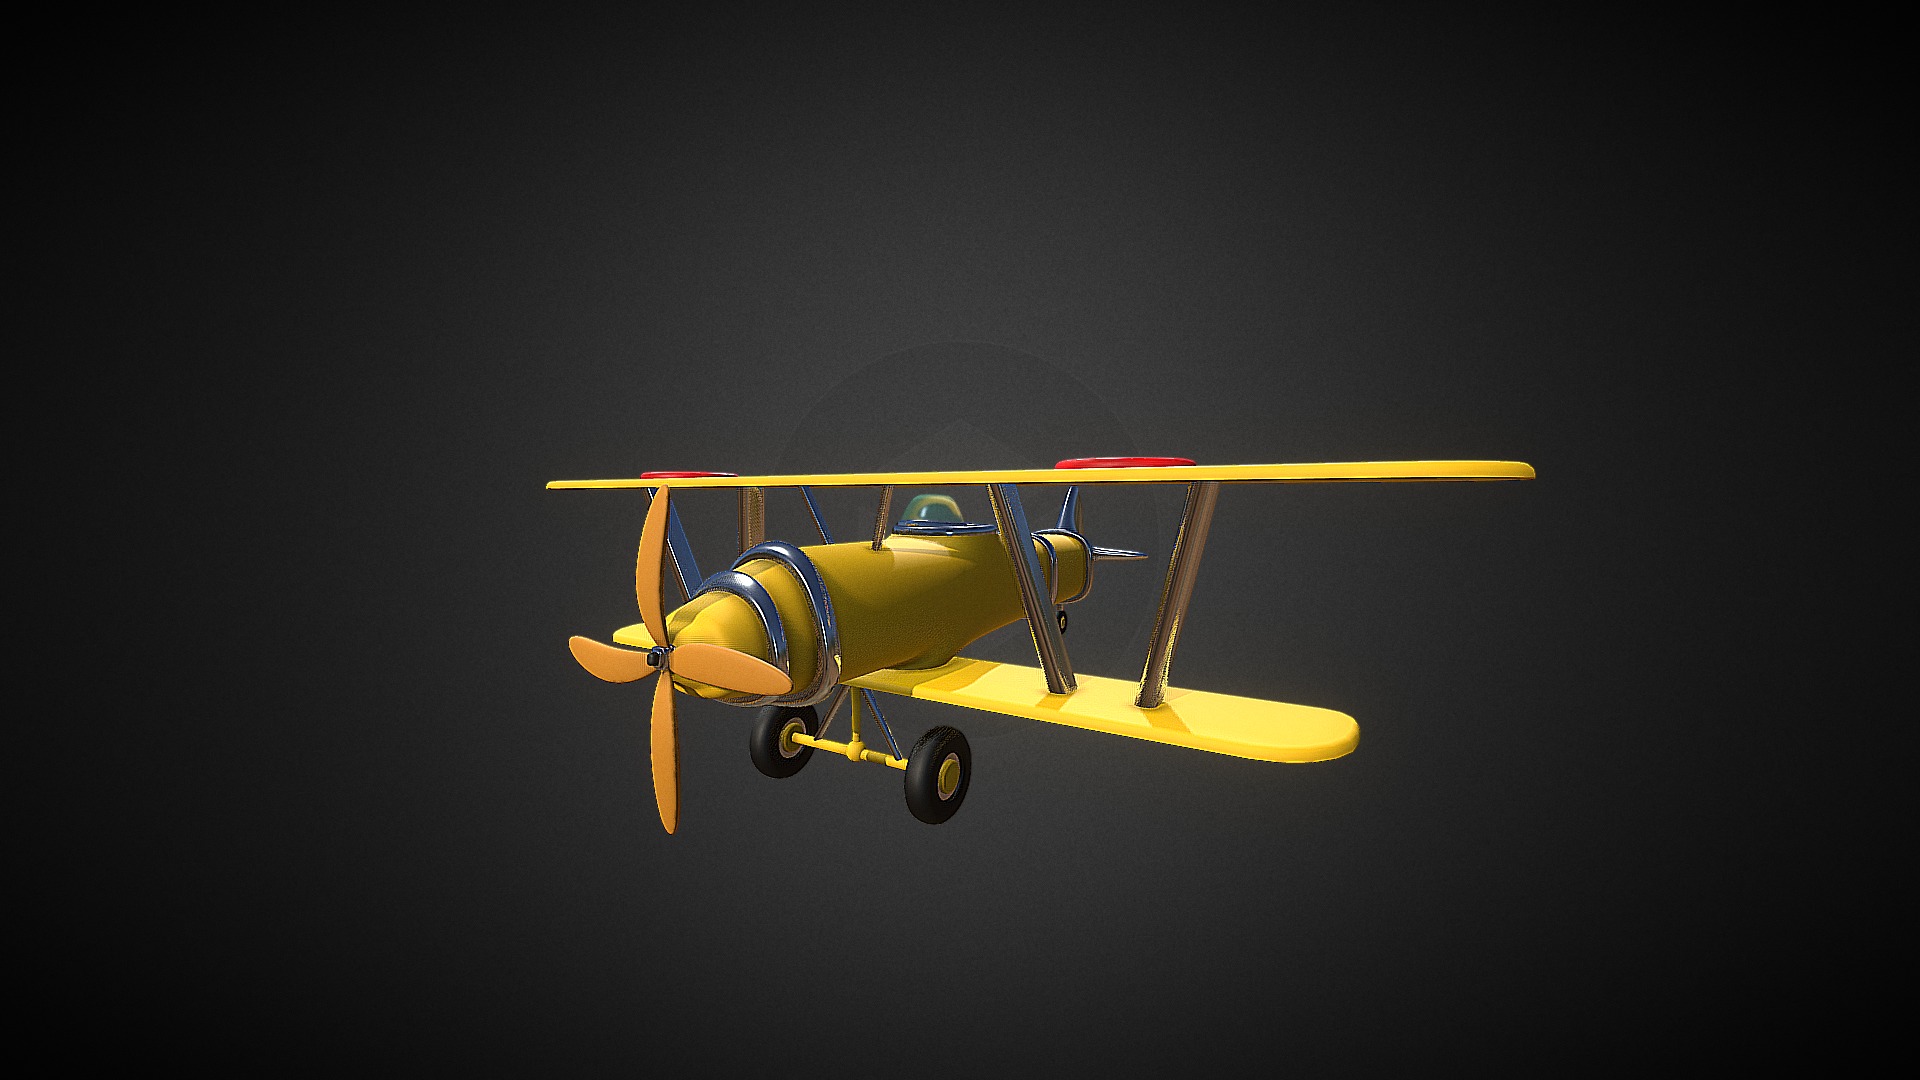 3D model Plane - This is a 3D model of the Plane. The 3D model is about a yellow airplane in the sky.